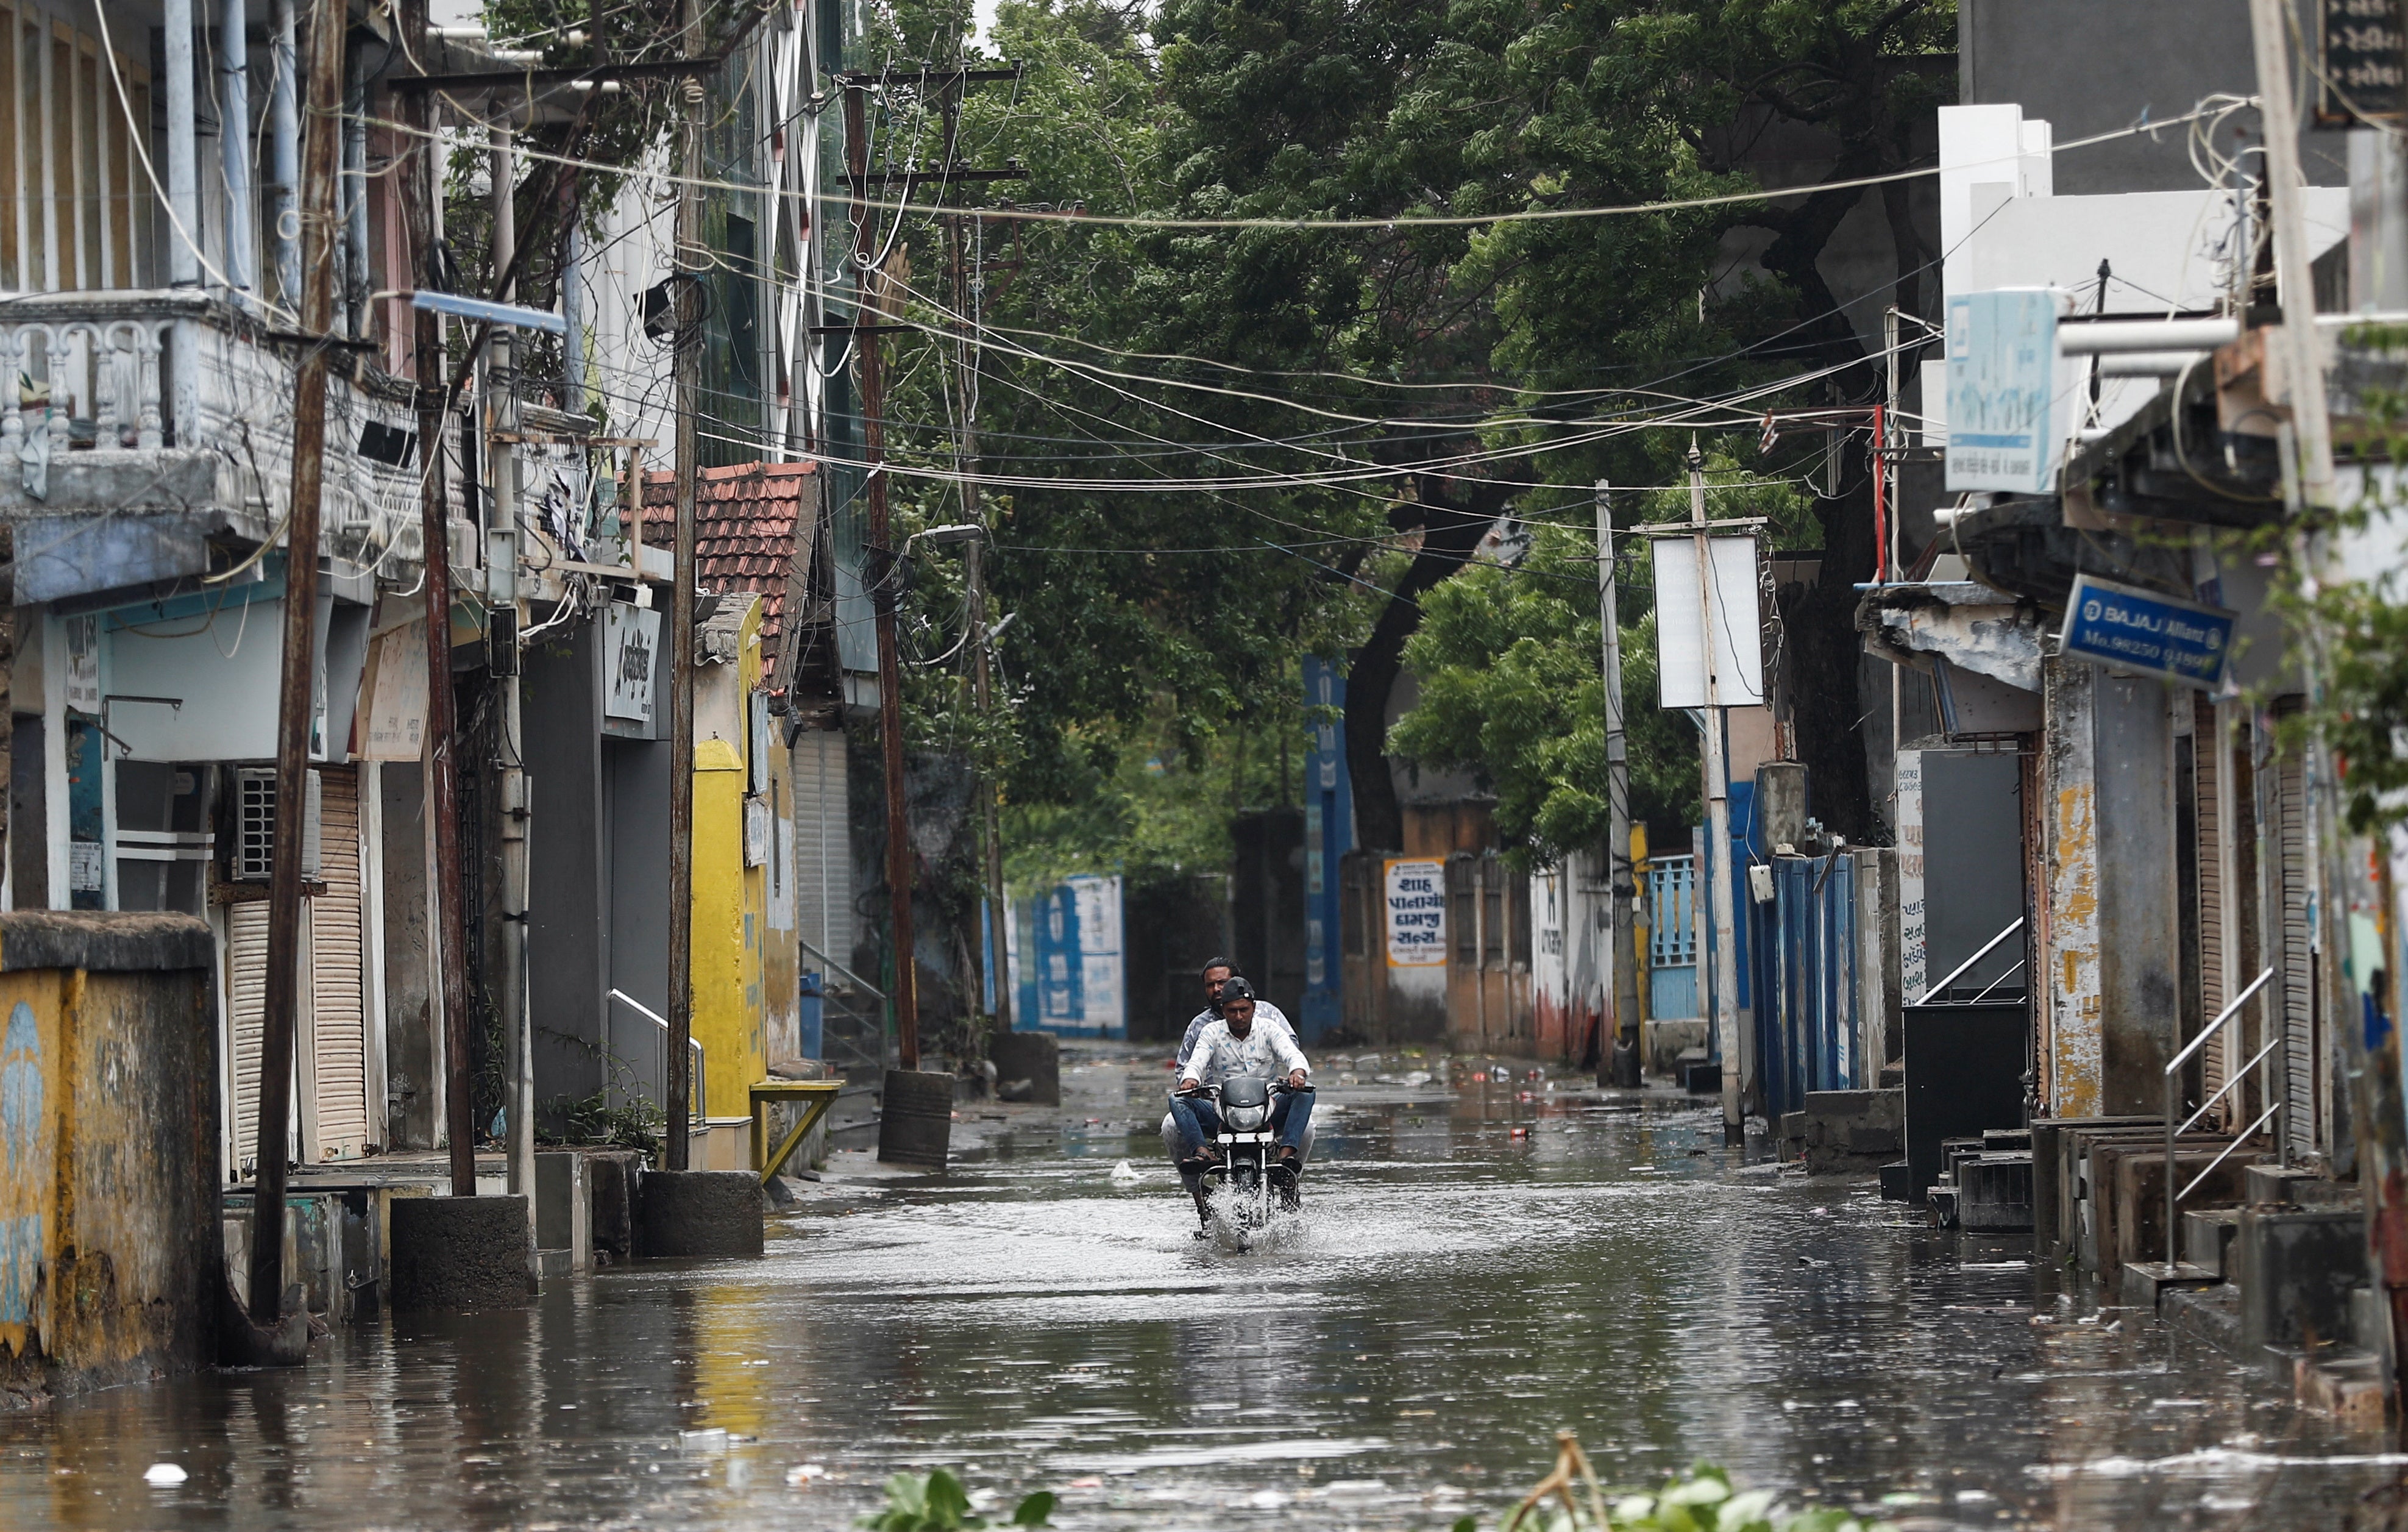 A man rides a motorcycle through a waterlogged street in Mandvi before the arrival of cyclone Biparjoy in the western state of Gujarat, India